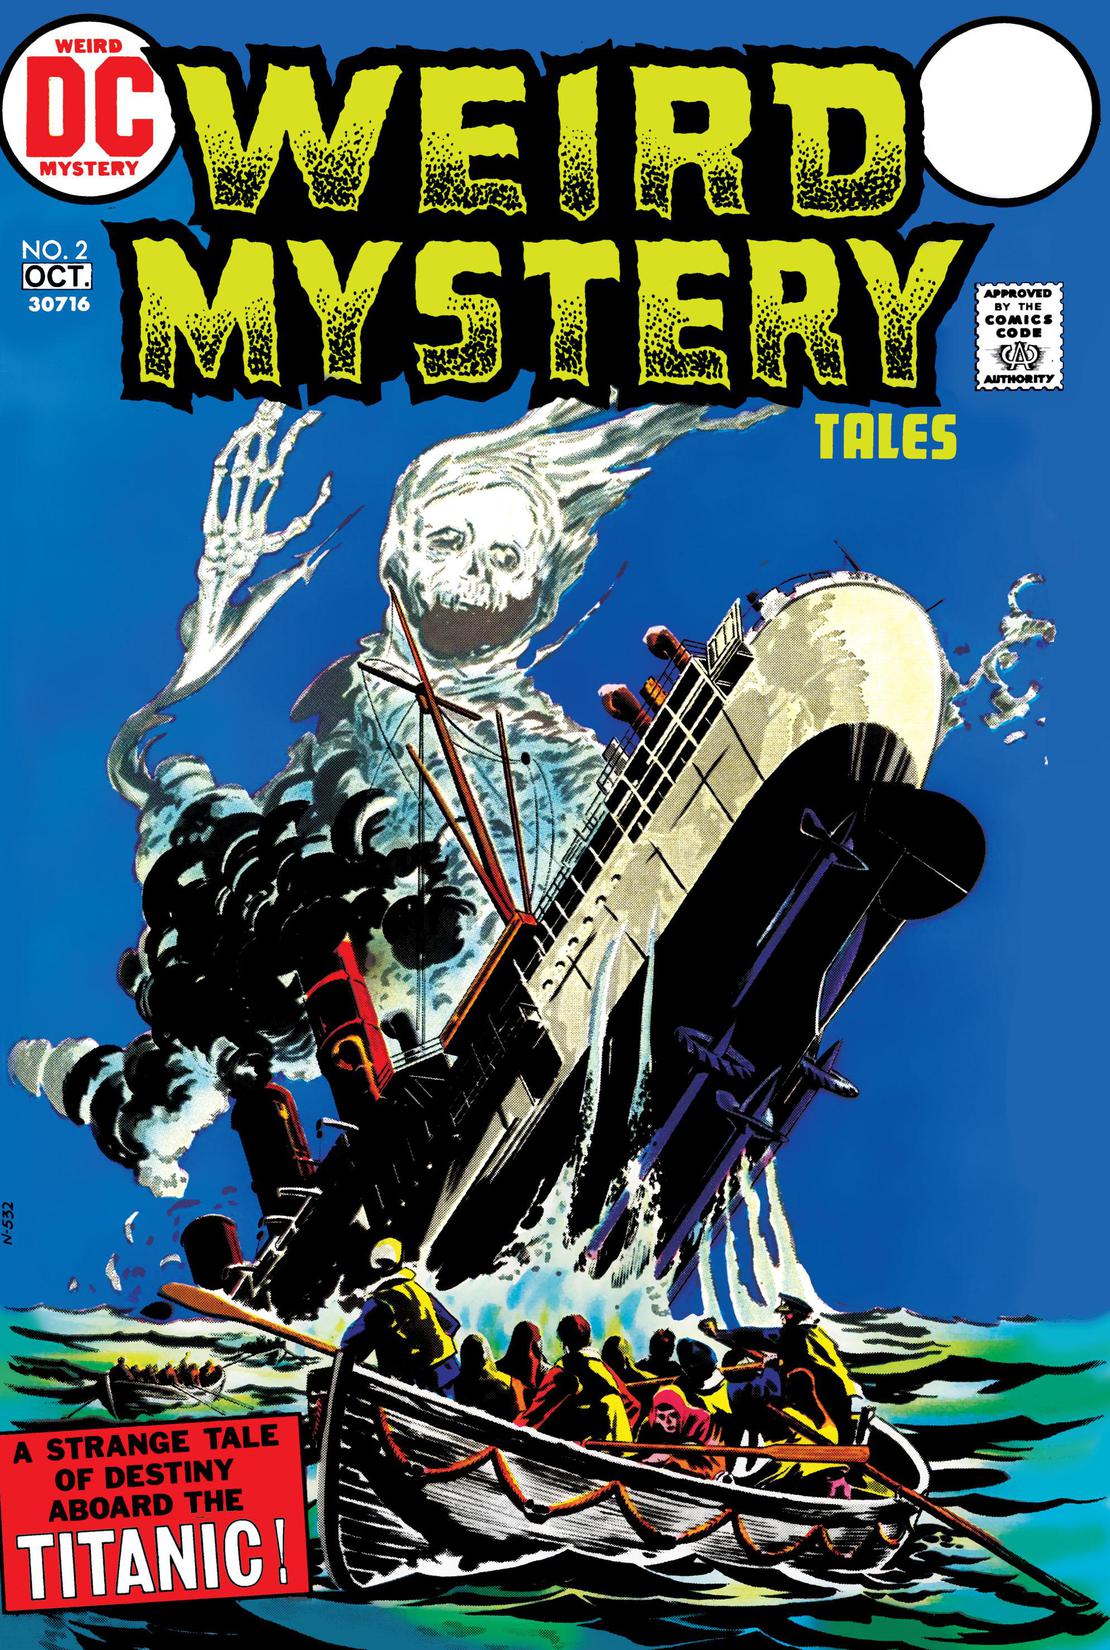 Weird Mystery Tales #2 preview images